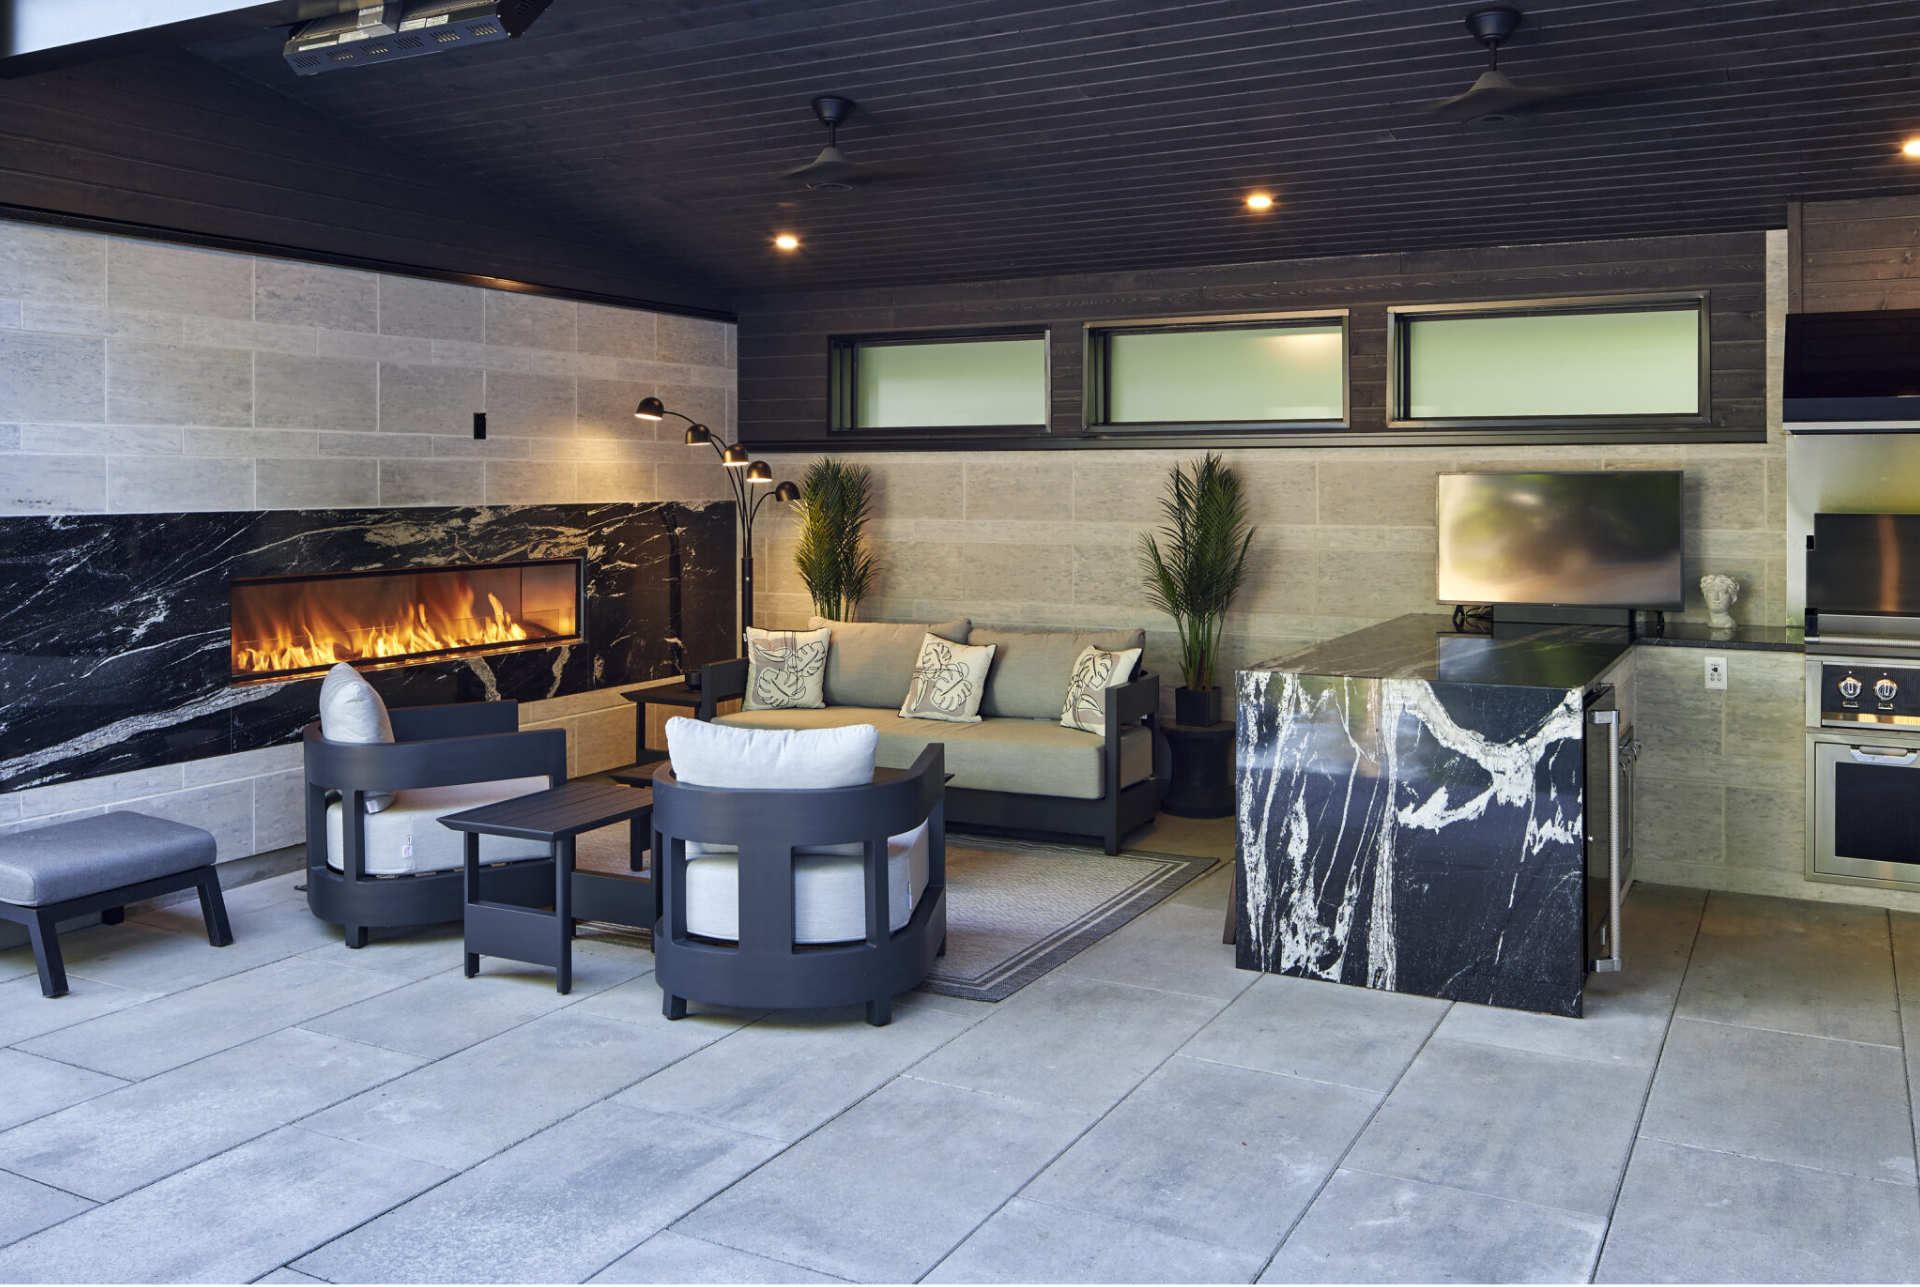 Outdoor living space with kitchen, outdoor seating, and pool by Mallette Landscaping